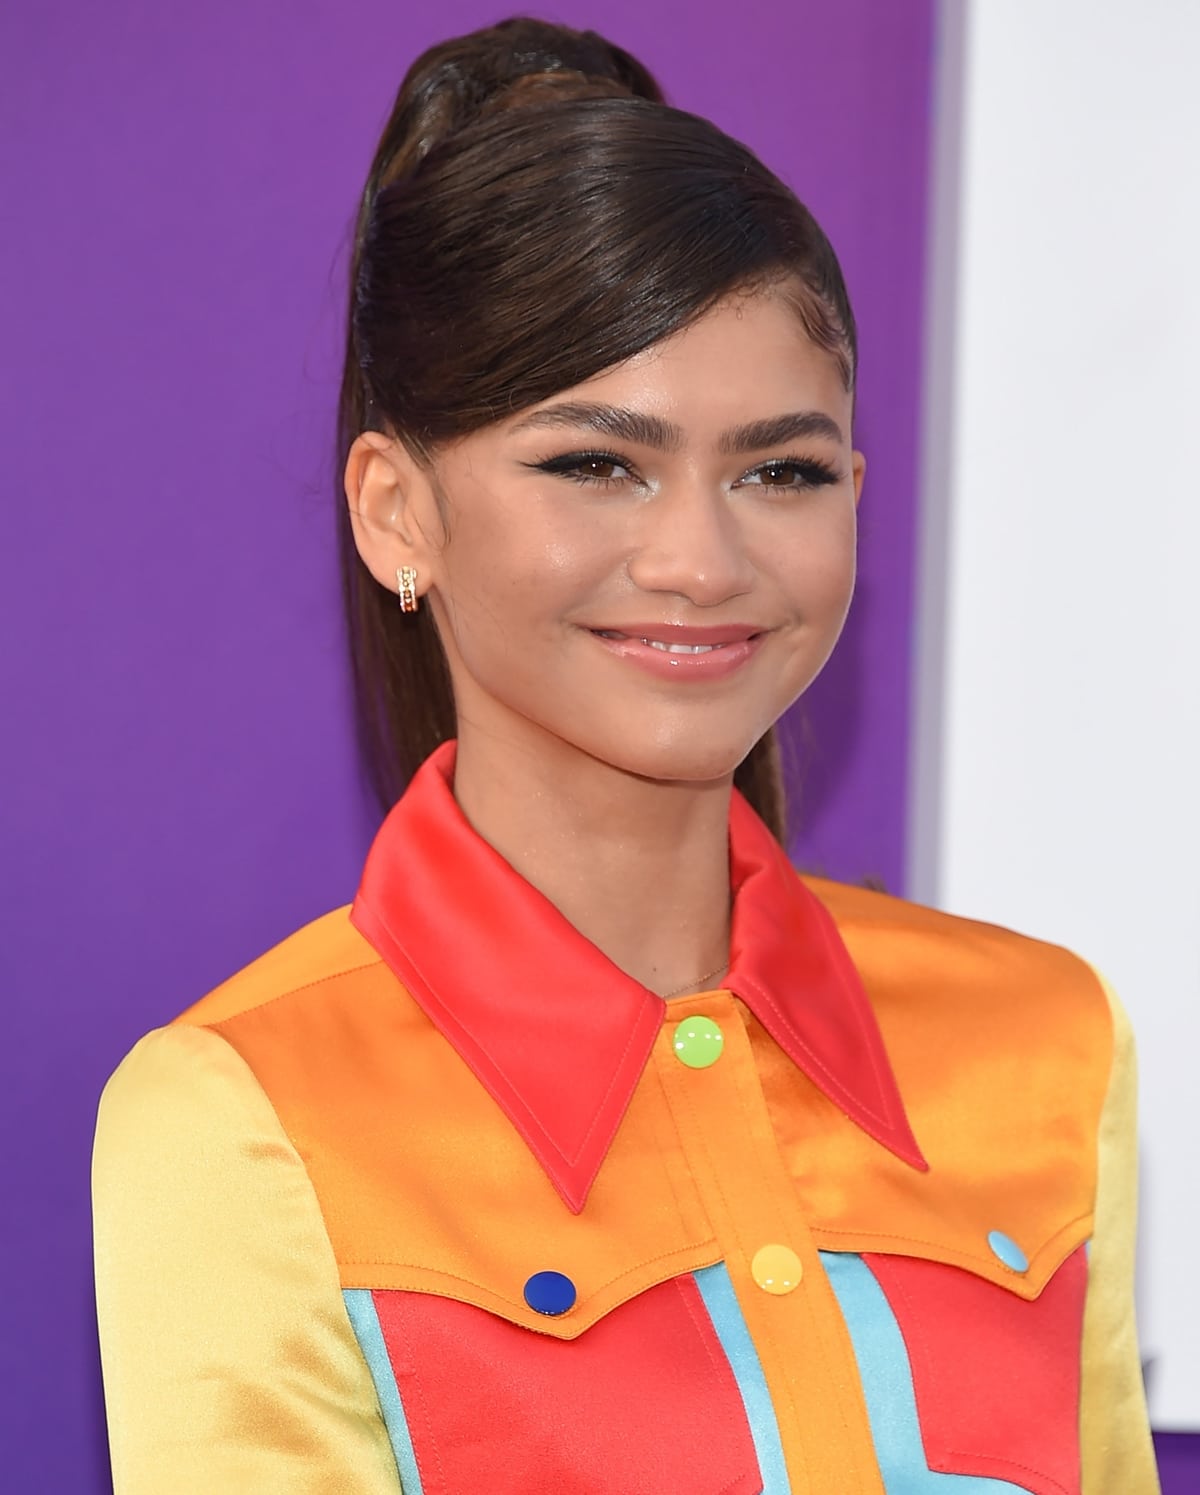 Zendaya is a fan favorite for one of the lead roles in a female-led "24 Jump Street" film